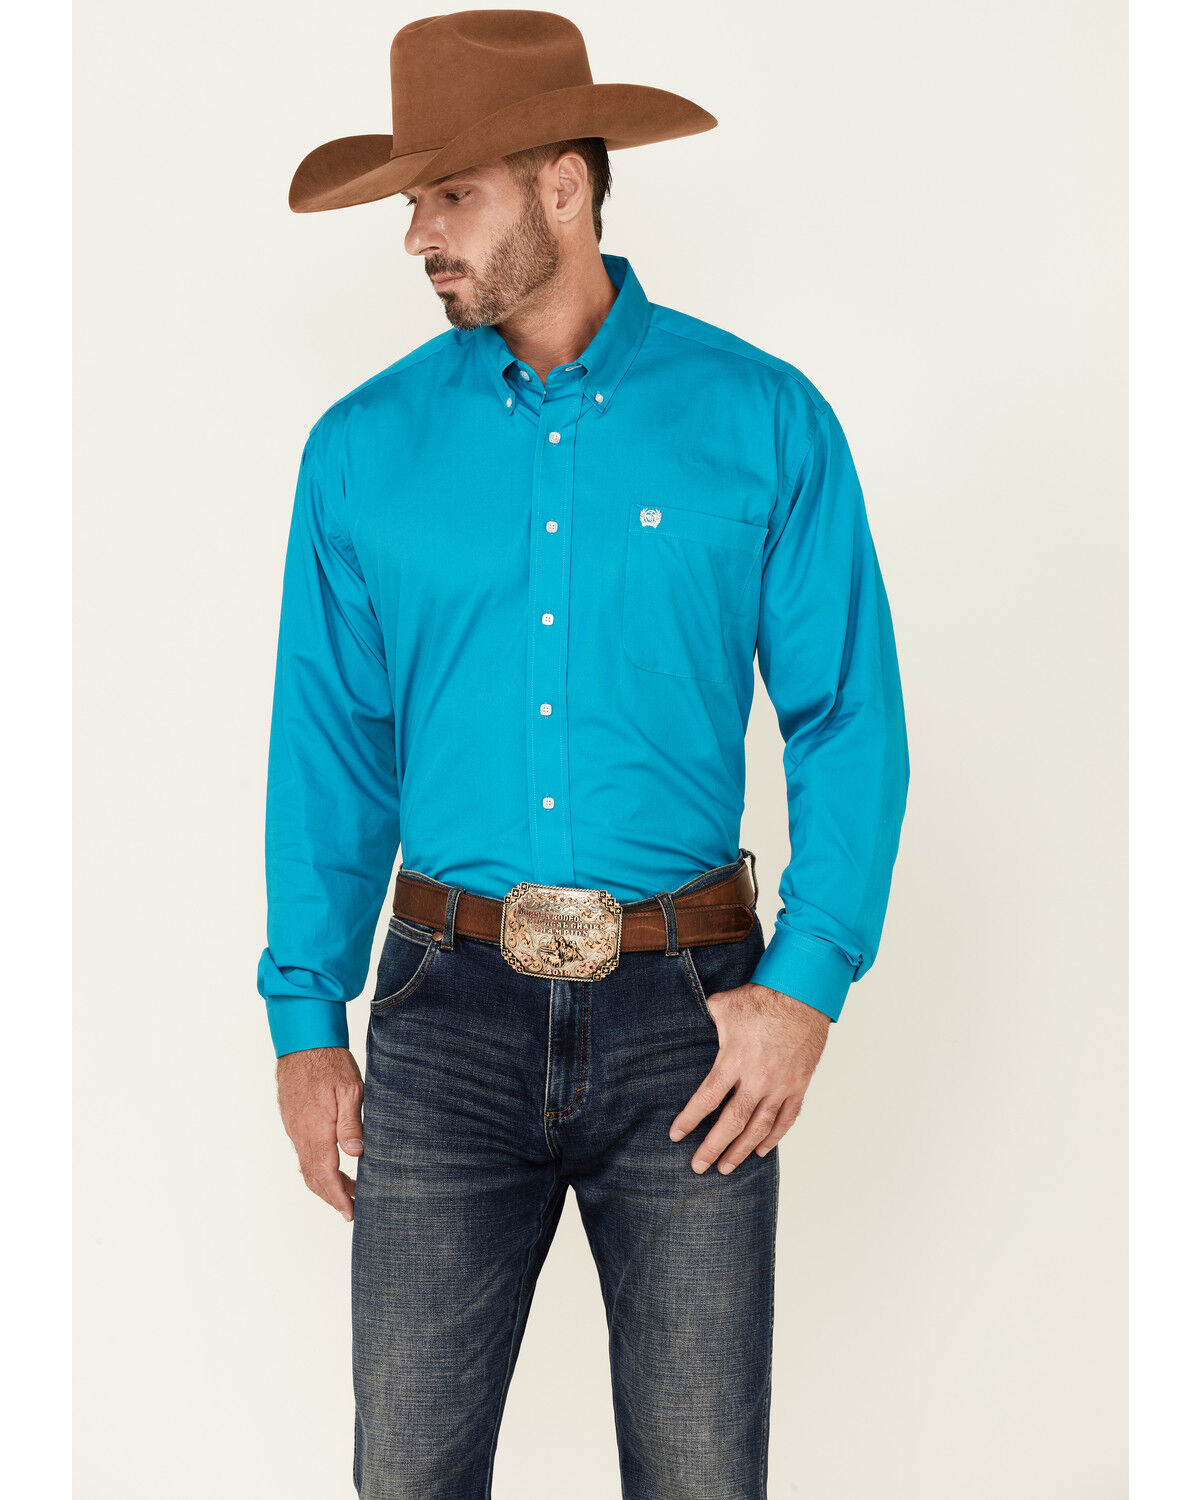 Men's Long Sleeve Shirts - Country ...